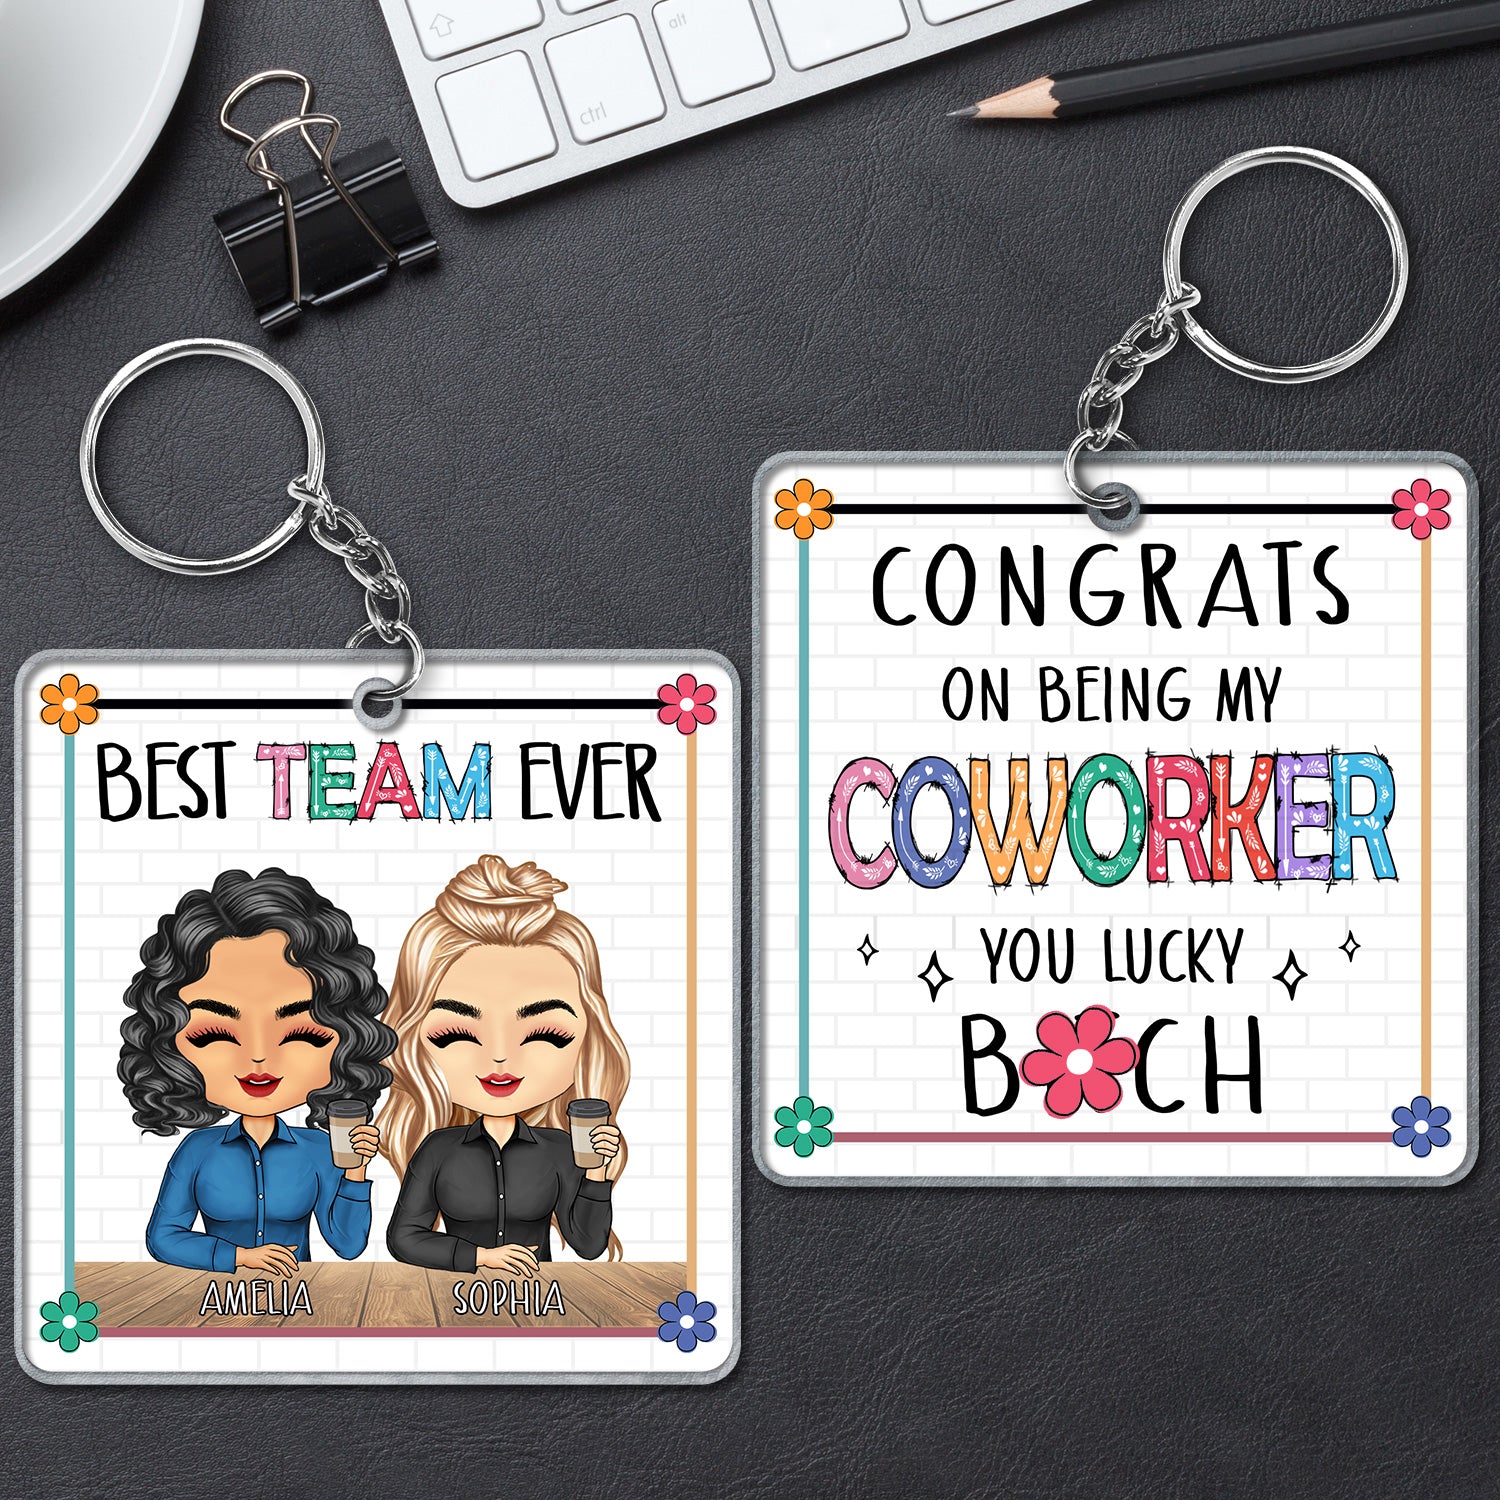 Congrats On Being My Coworker - Gift For Colleagues - Personalized Acrylic Keychain